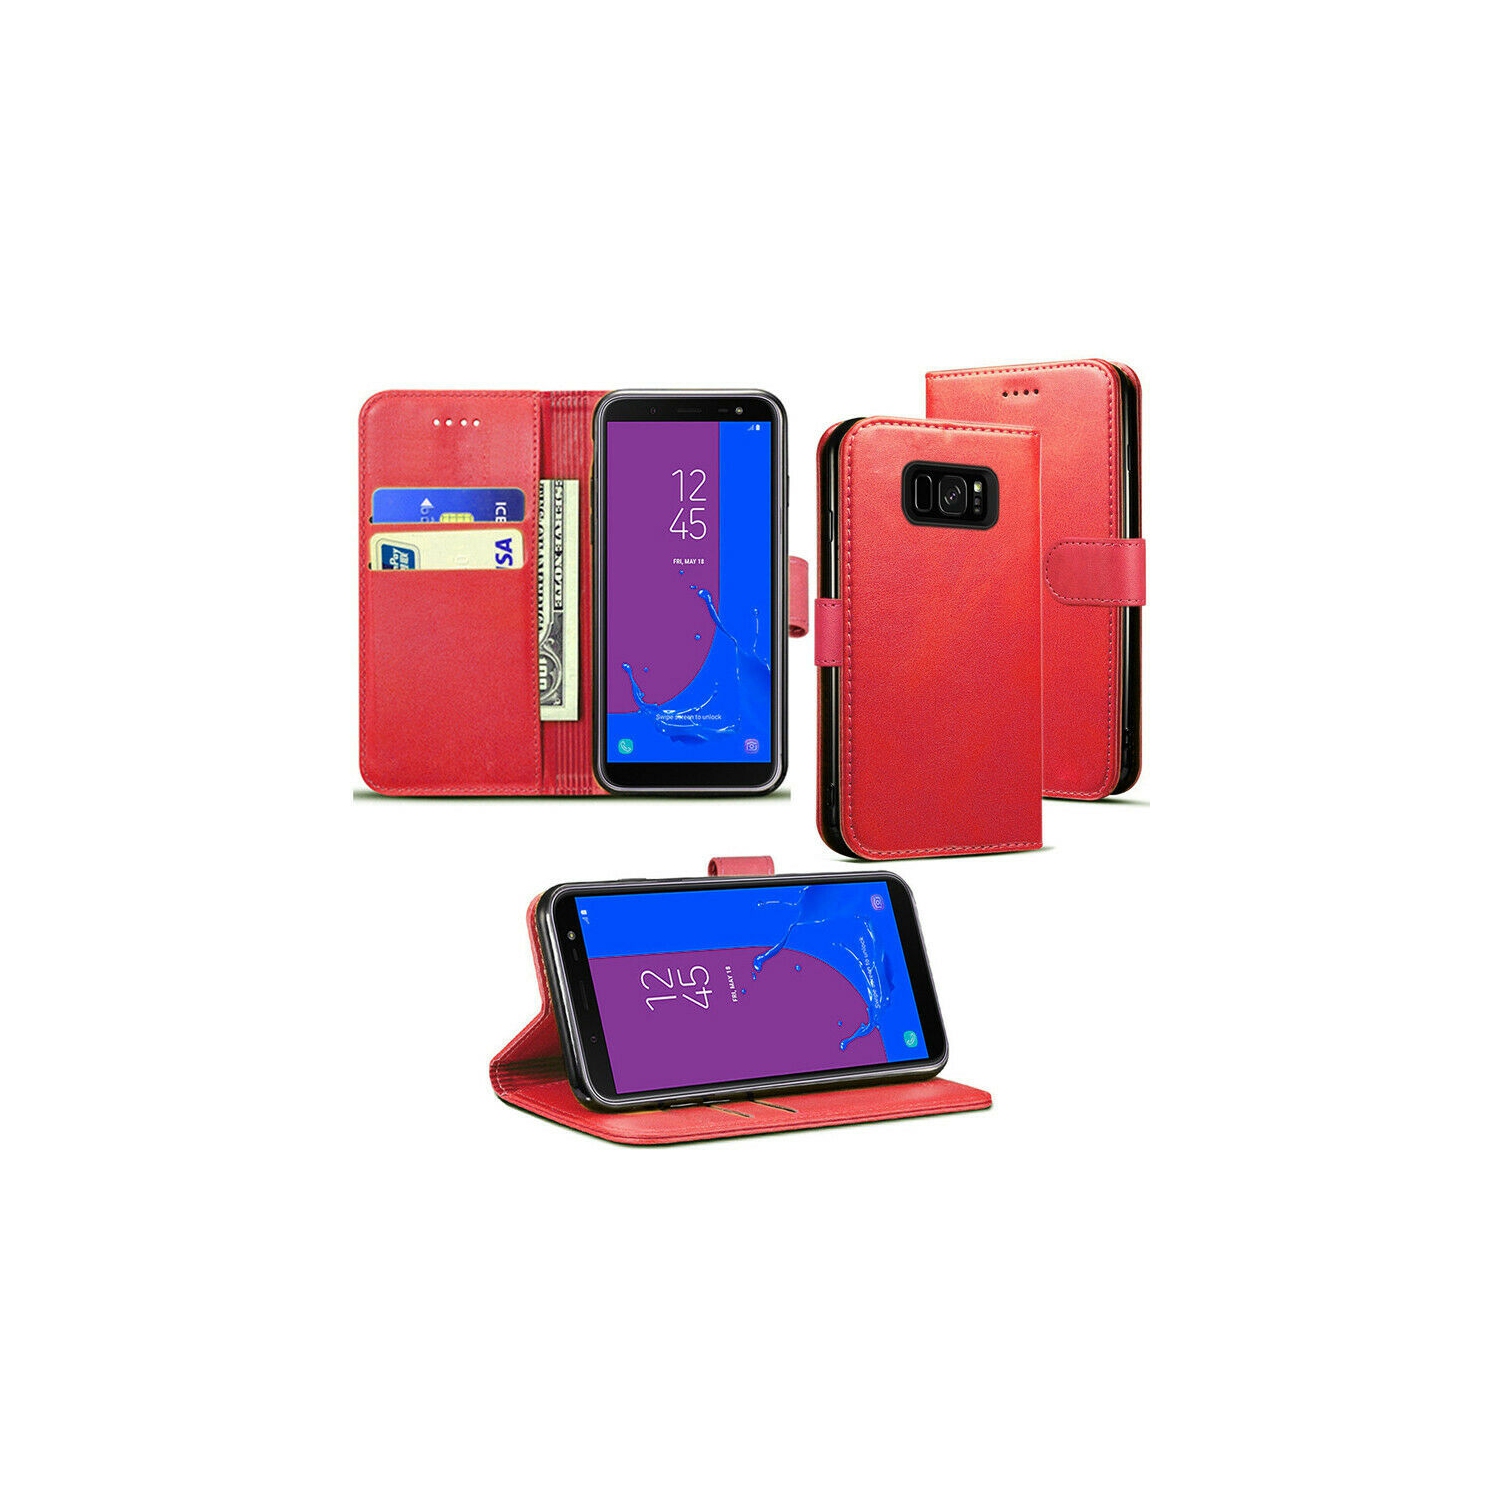 【CSmart】 Magnetic Card Slot Leather Folio Wallet Flip Case Cover for Samsung Galaxy S8 Plus, Red